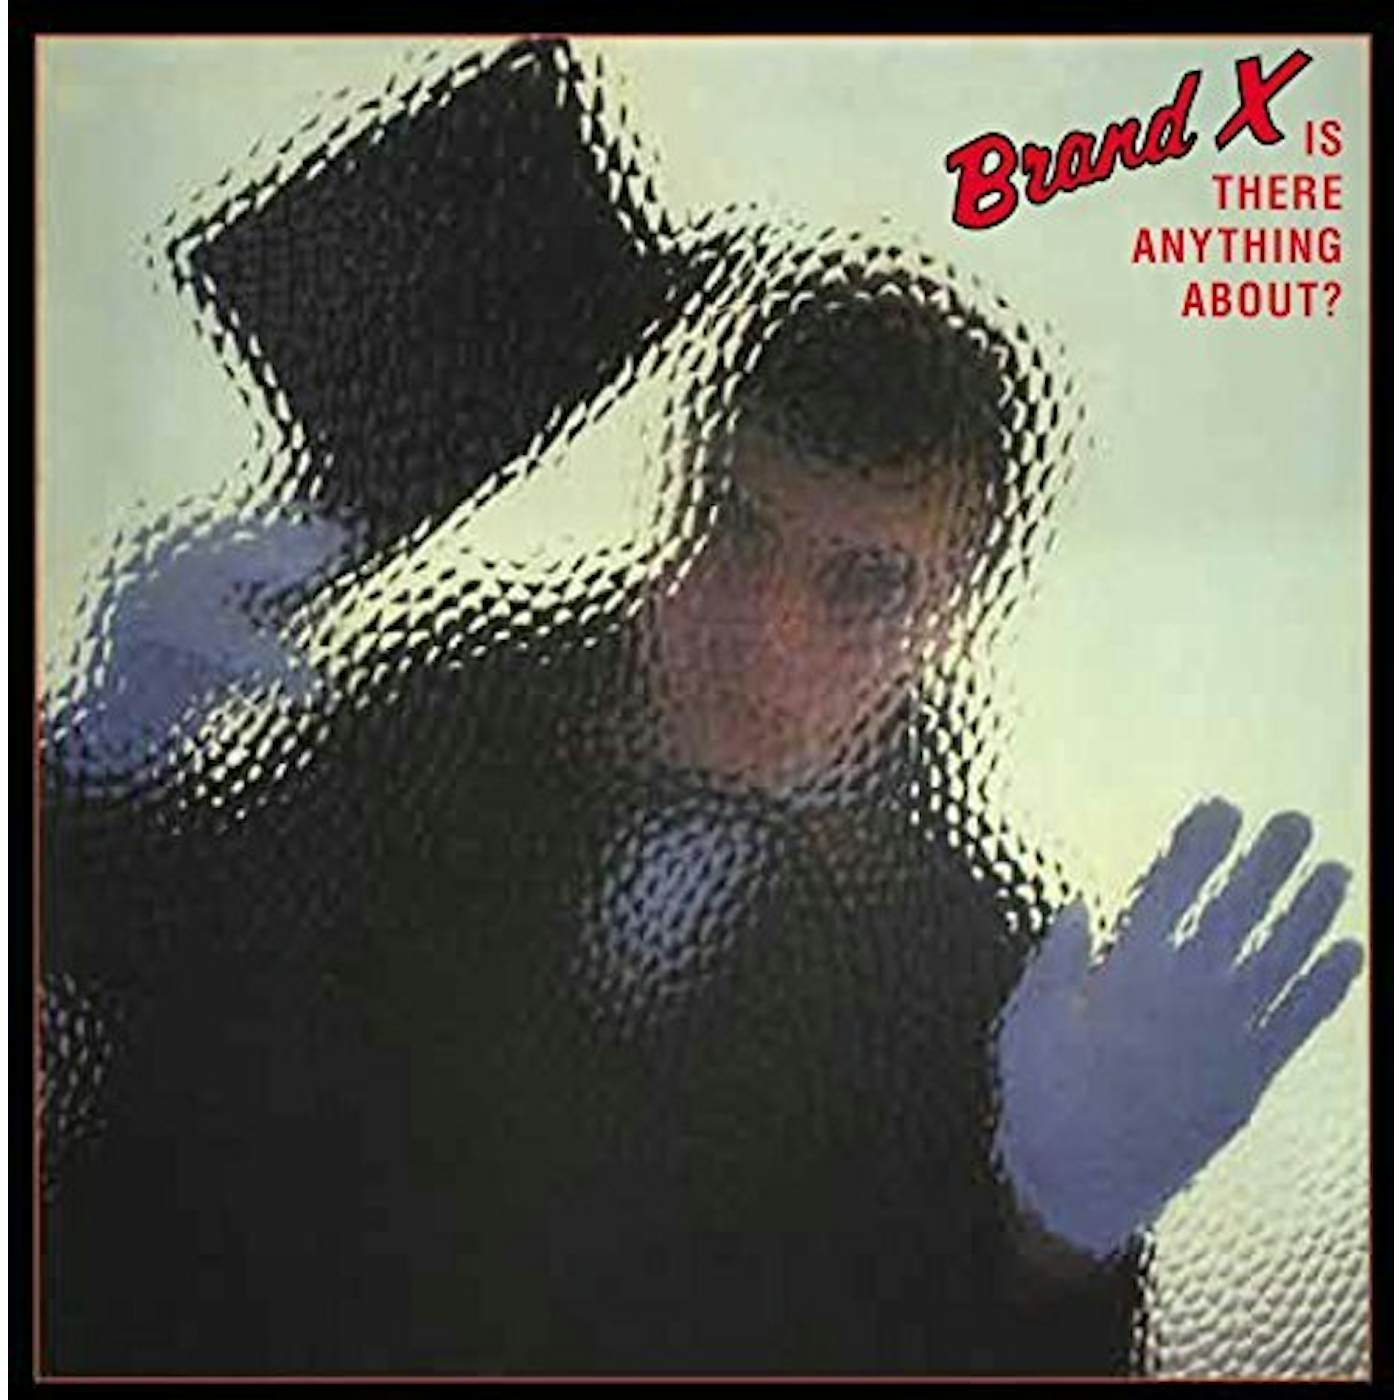 Brand X IS THERE ANYTHING ABOUT? CD